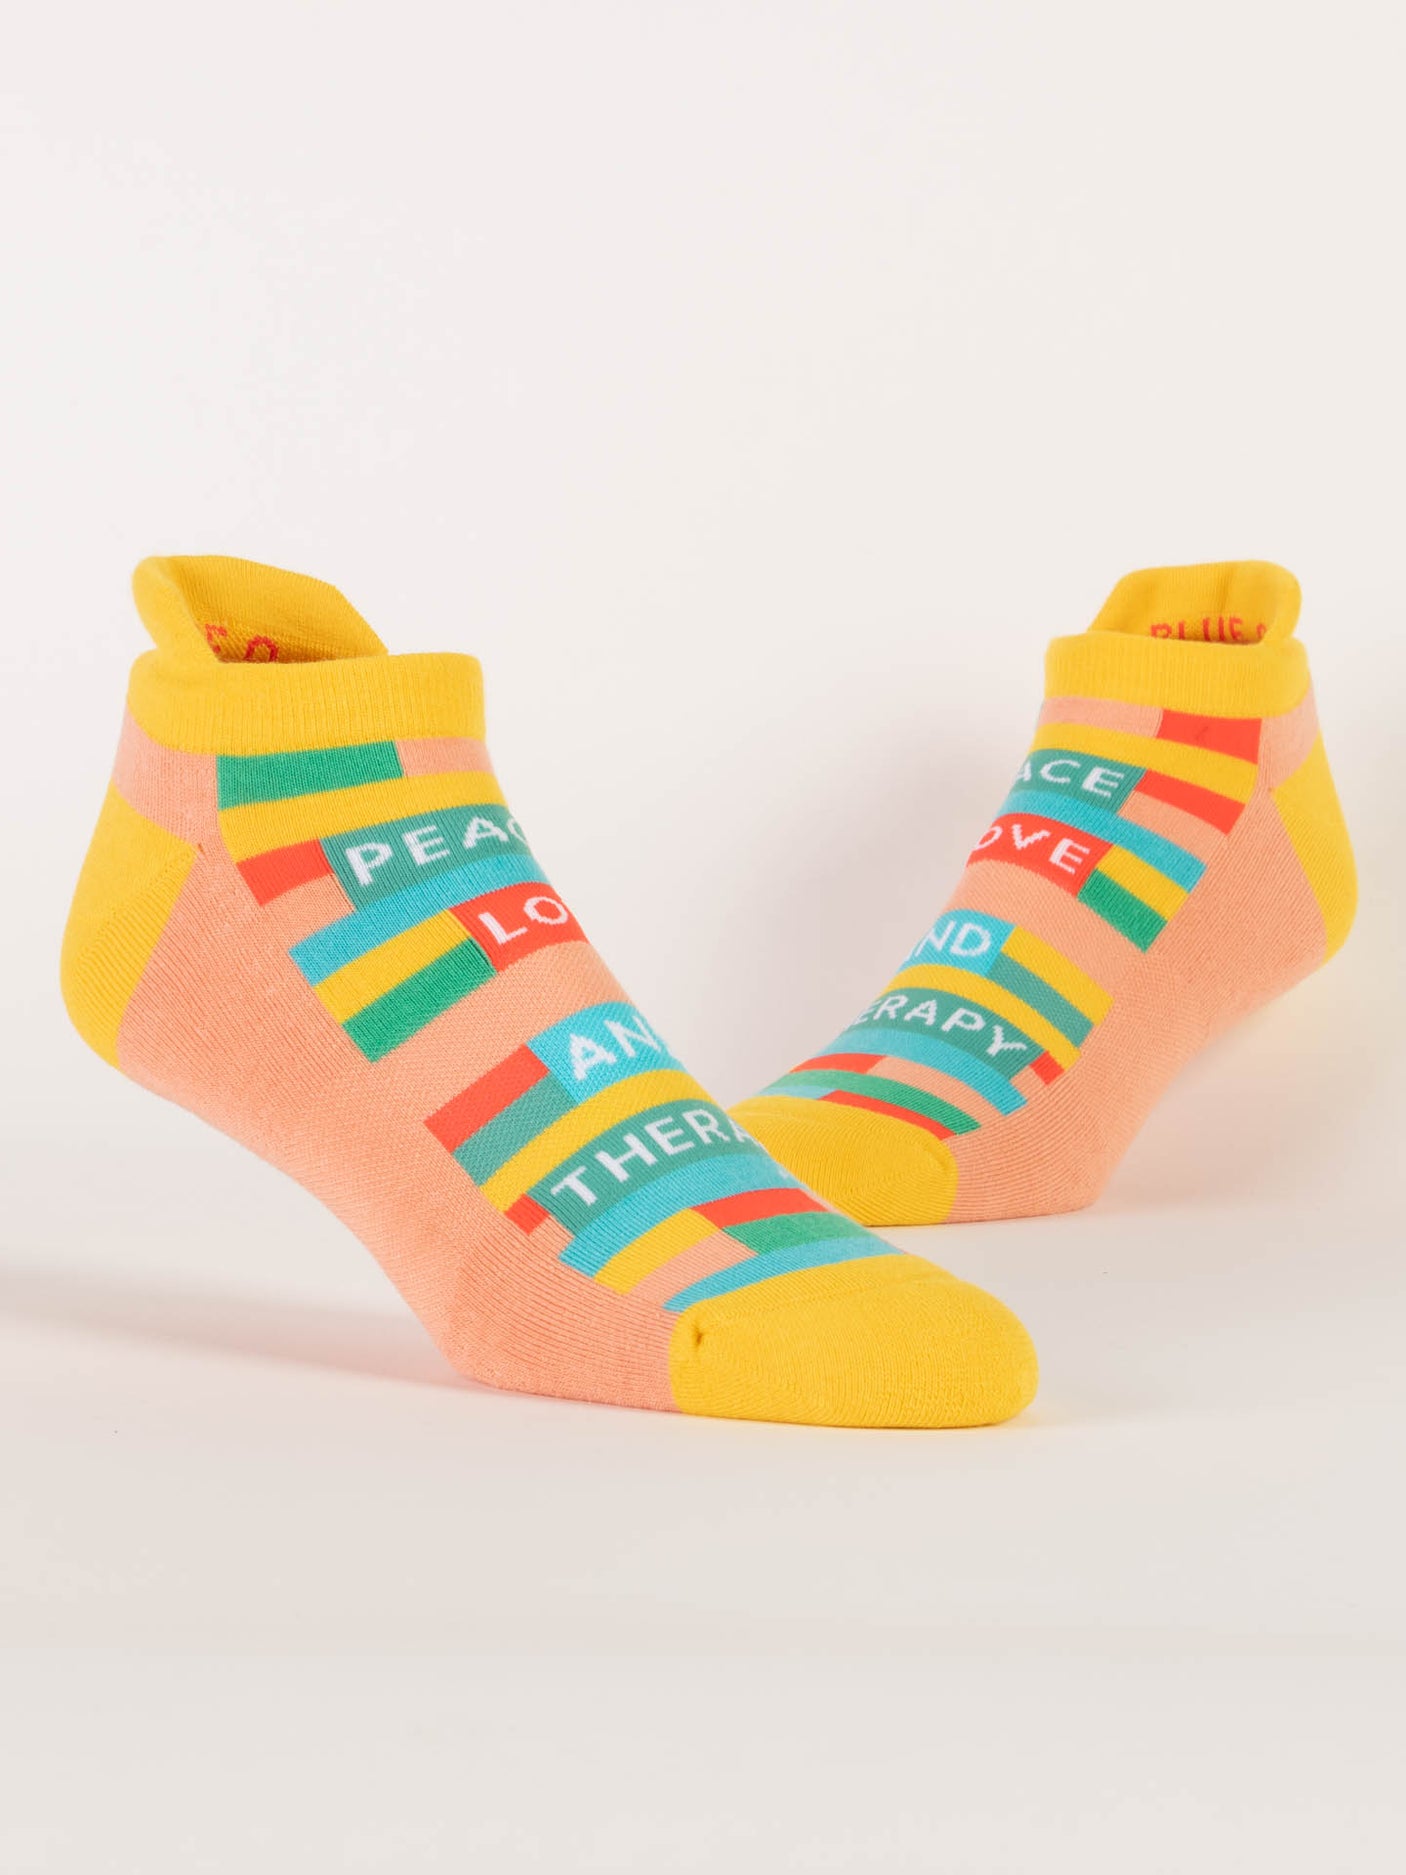 Blue Q Peace Love and Therapy Sneaker Ankle Socks